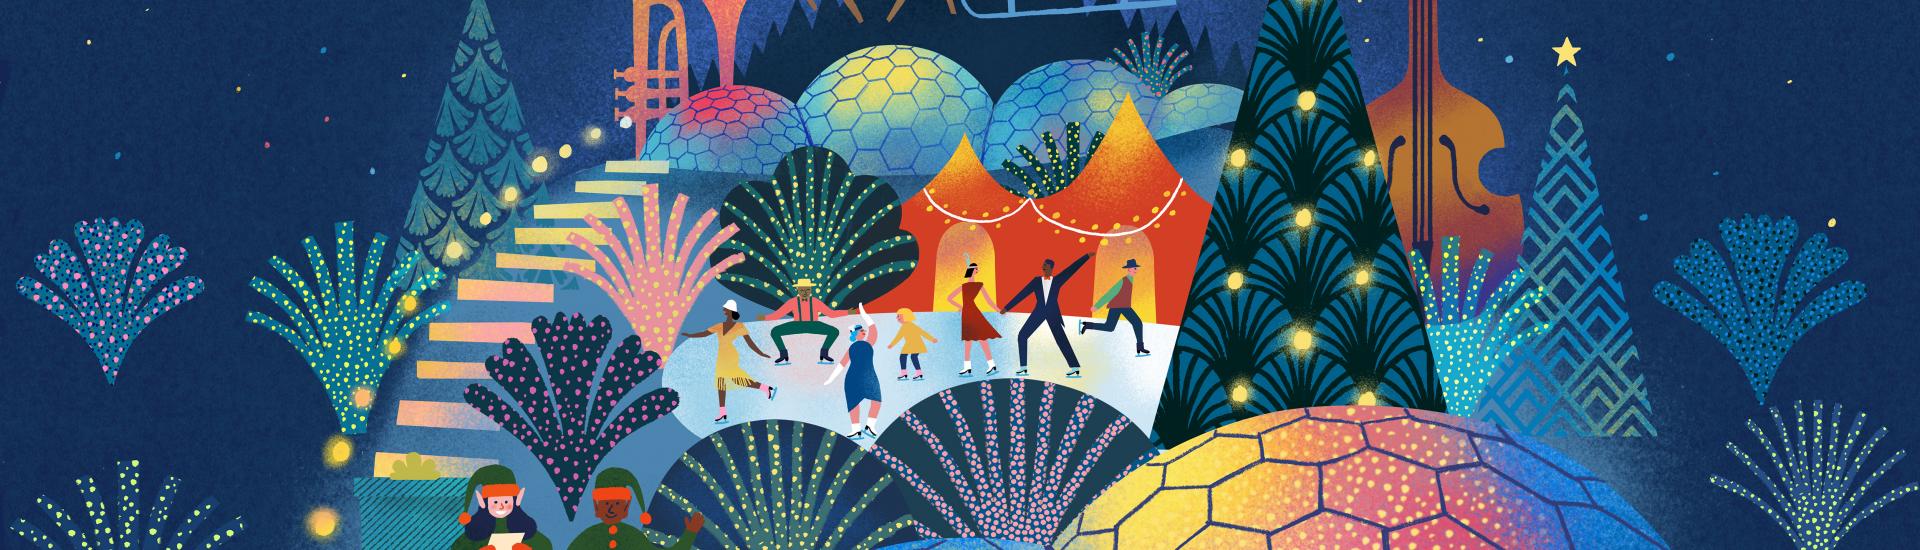 Christmas illustration of Eden Project with ice rink, lit up Biomes, elves, father Christmas flying through the sky and elves